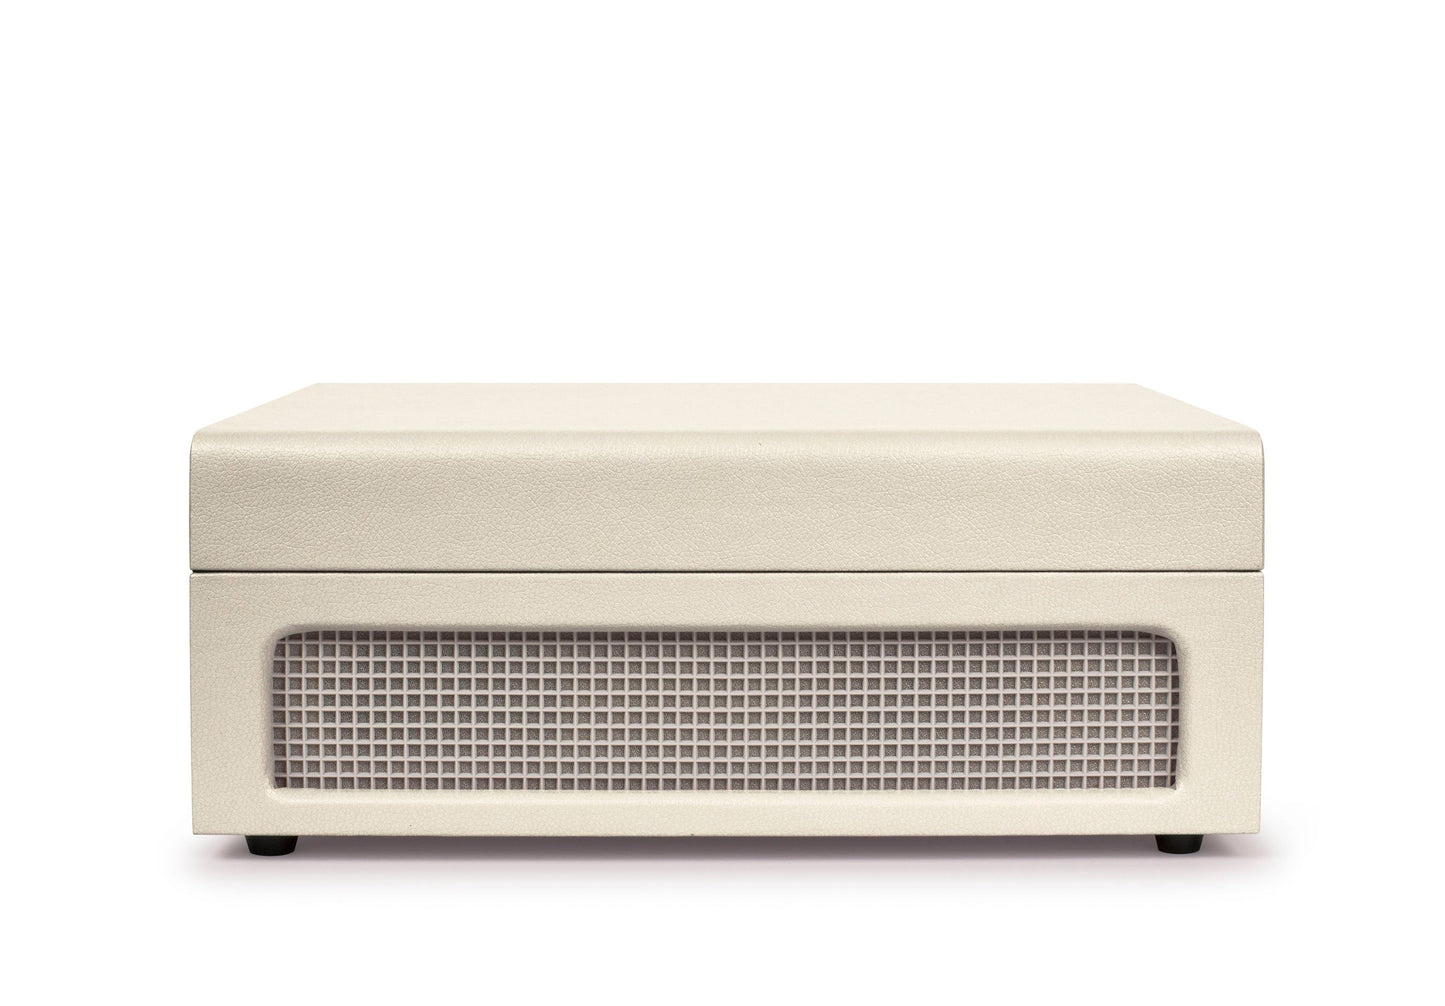 Crosley Voyager Dune - Bluetooth Portable Turntable & Record Storage Crate